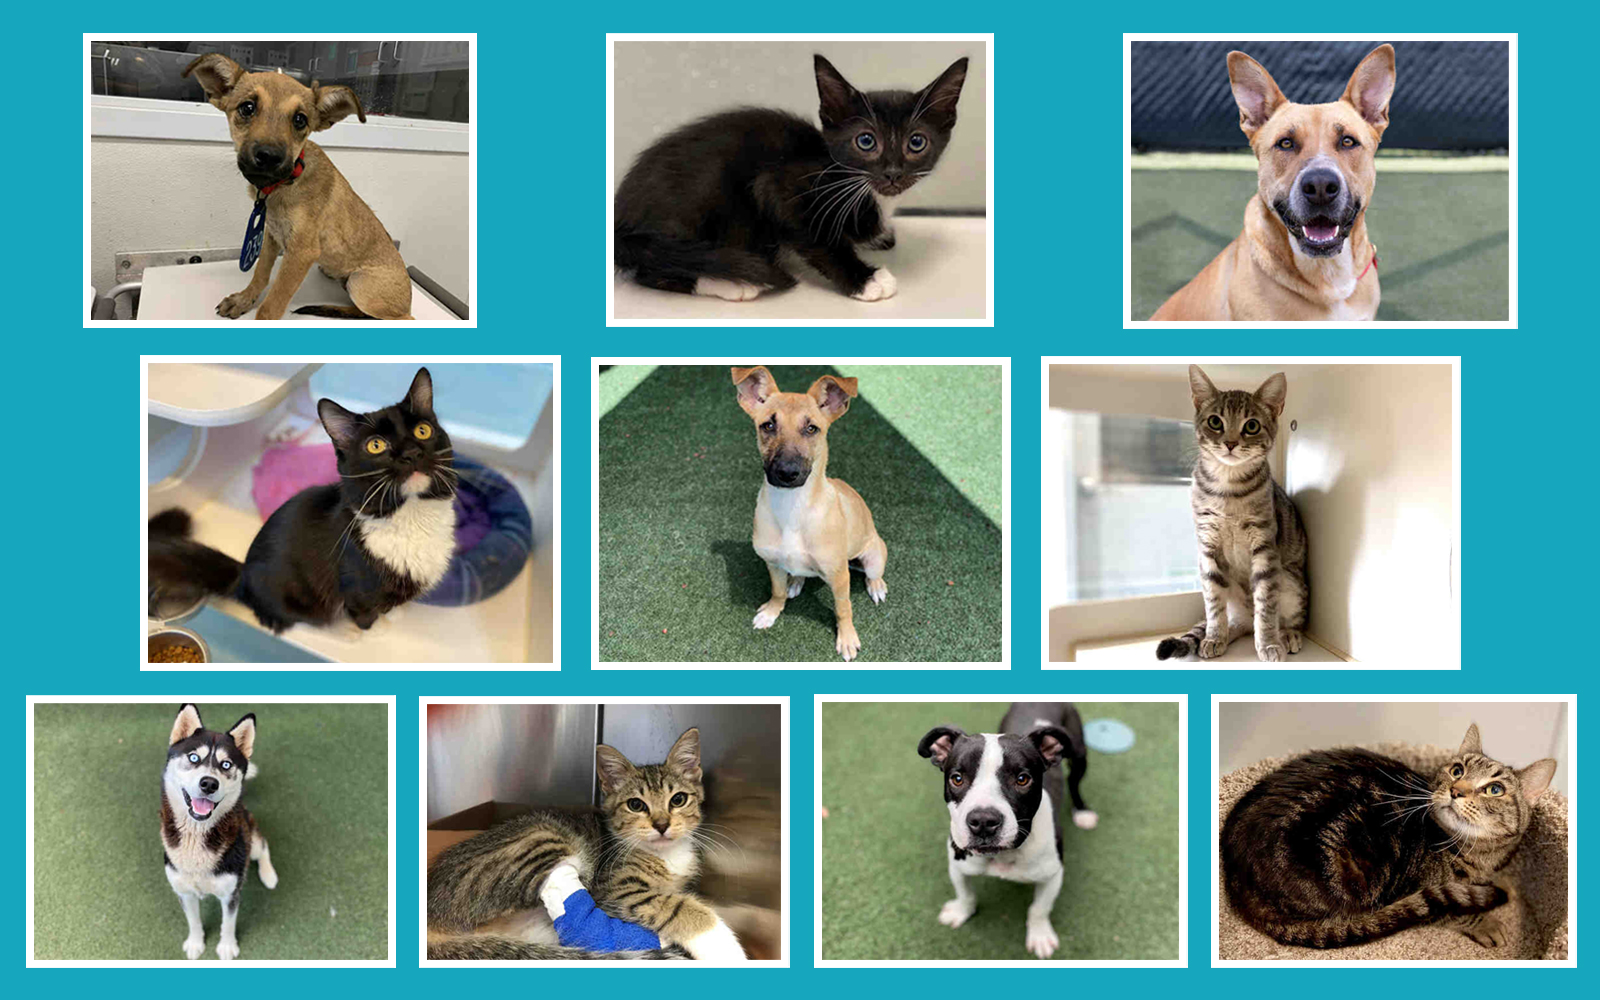 10 dogs, cats currently available for adoption.